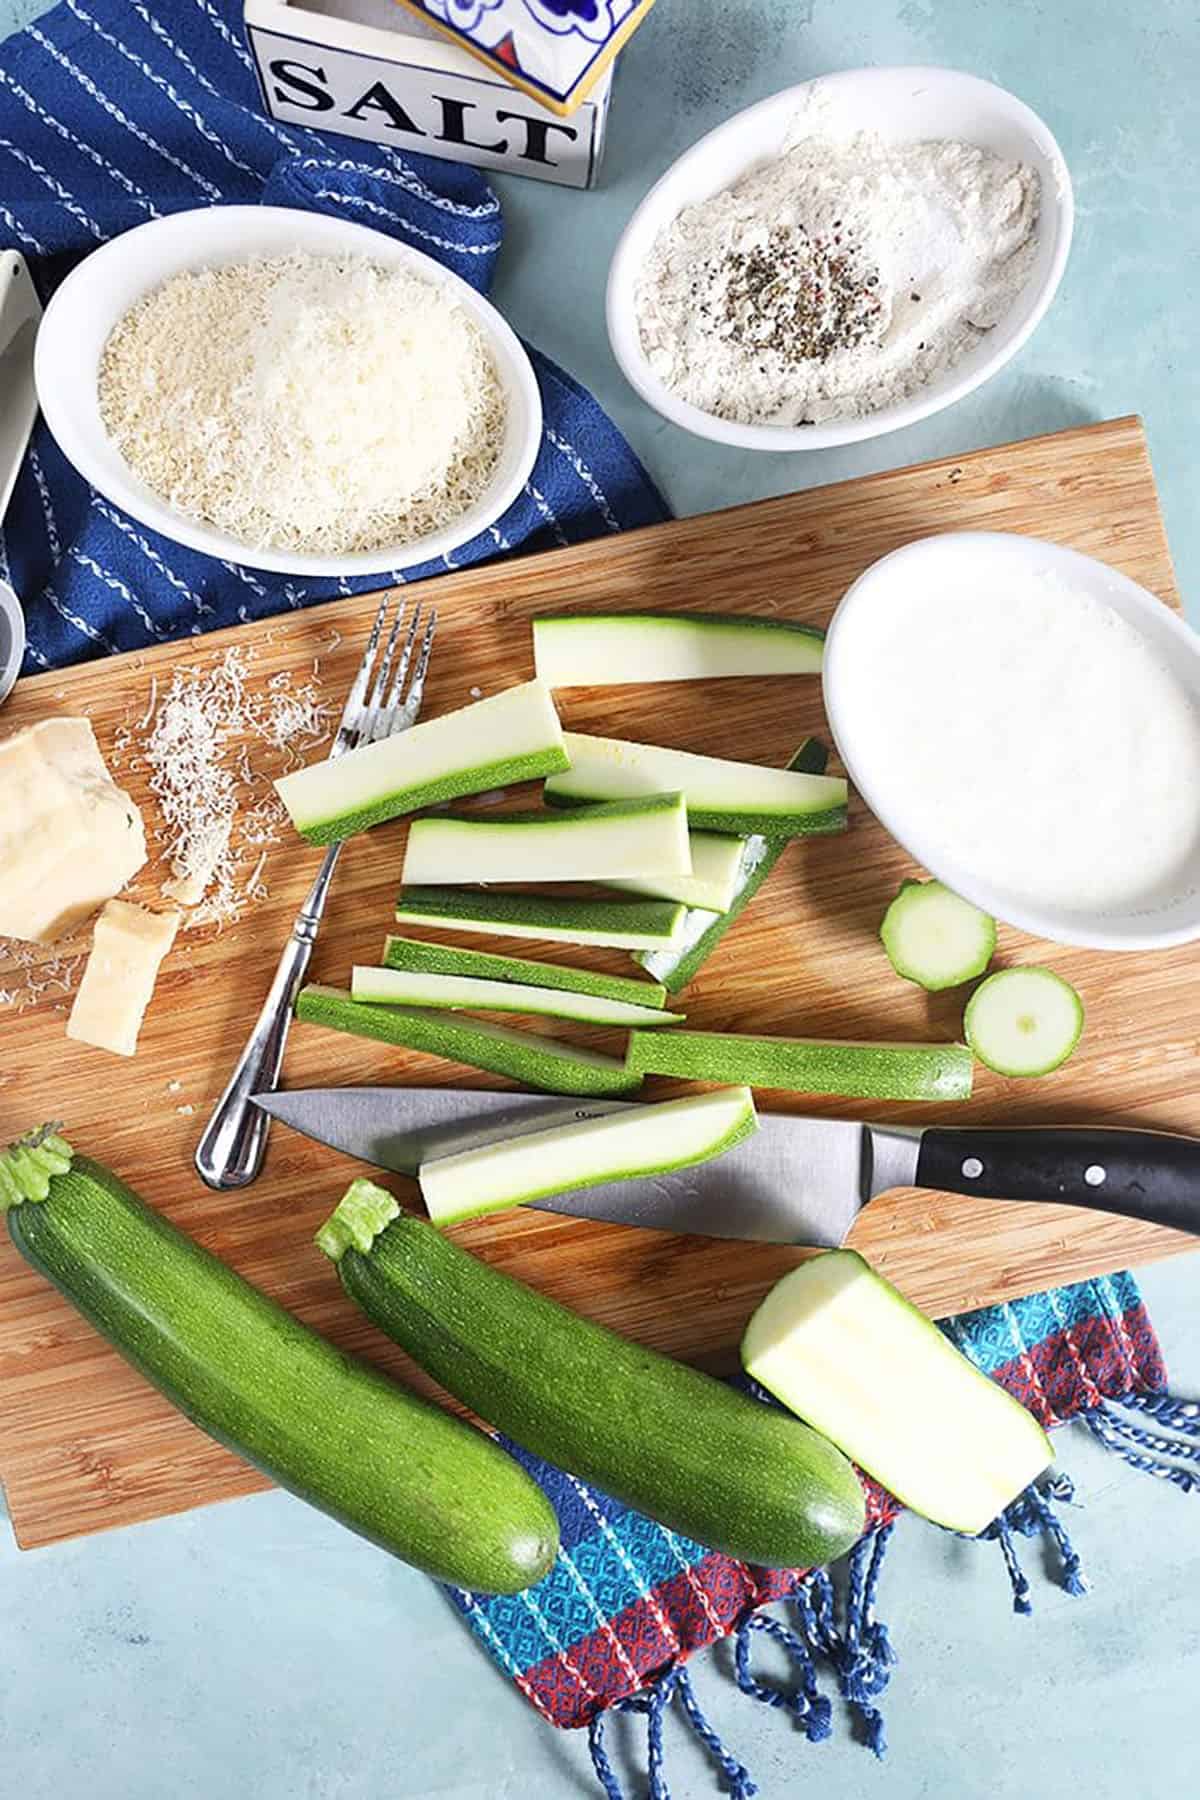 zucchini cut into sticks with three bowls with flour and breadcrumbs for dredging the zucchini.